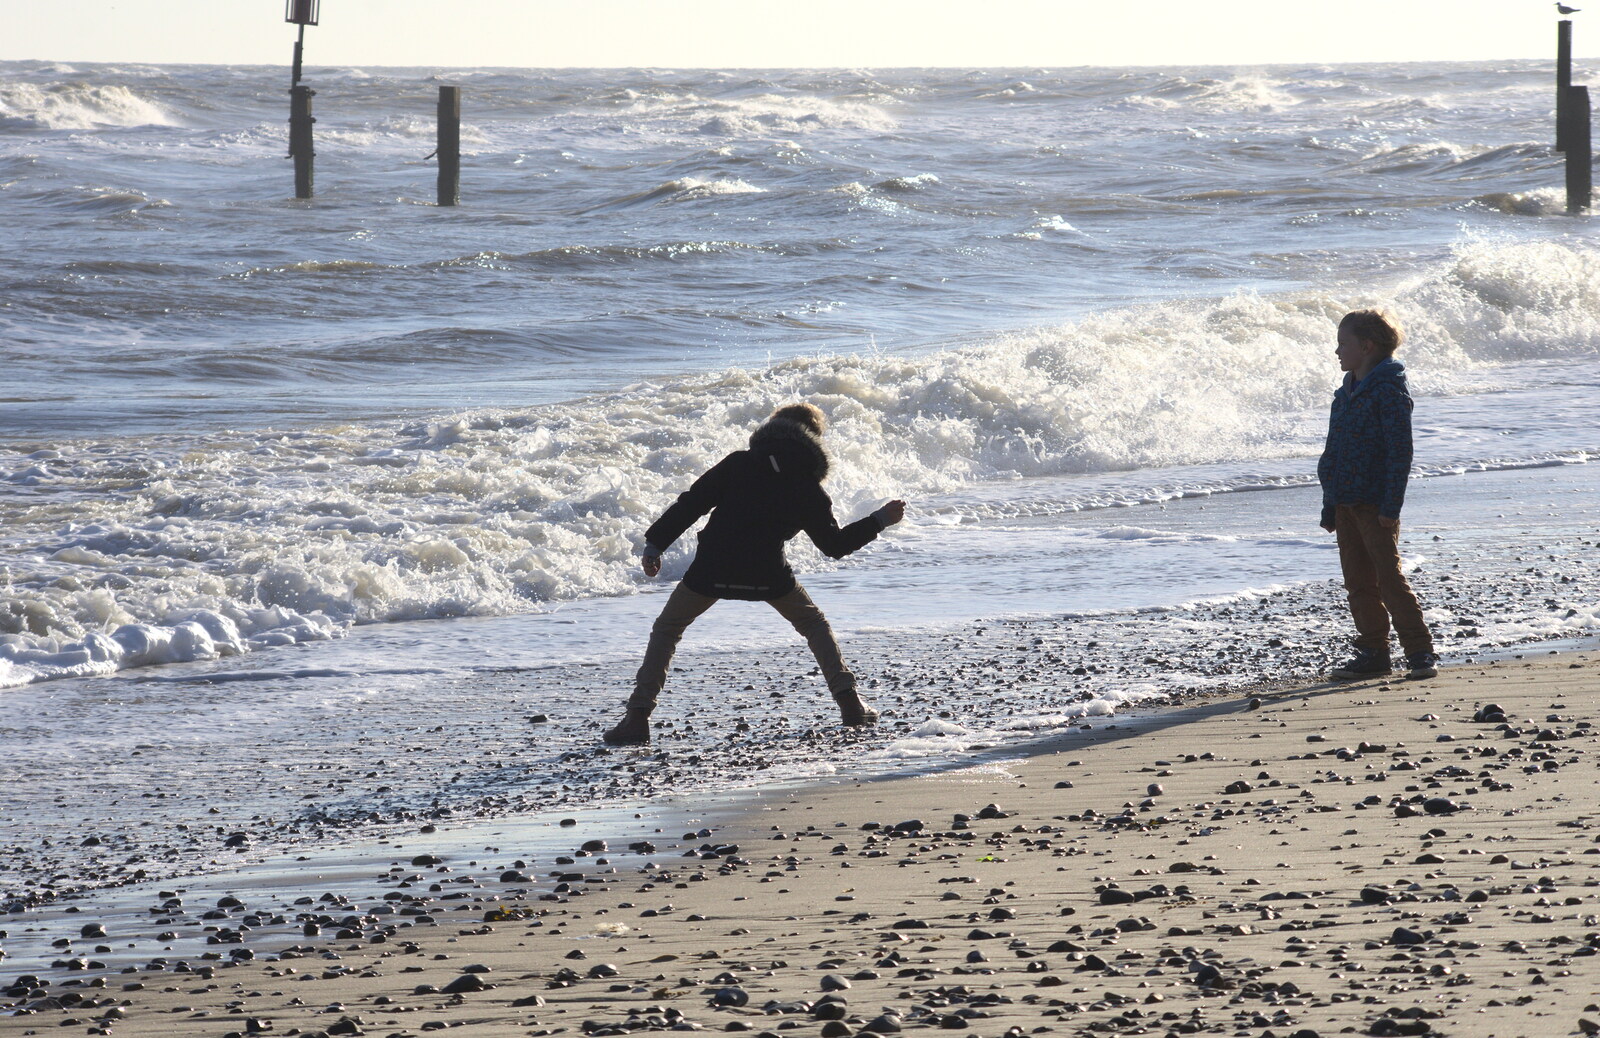 Fred hurls a stone into the sea from Sunset at the Beach, Southwold, Suffolk - 18th November 2018